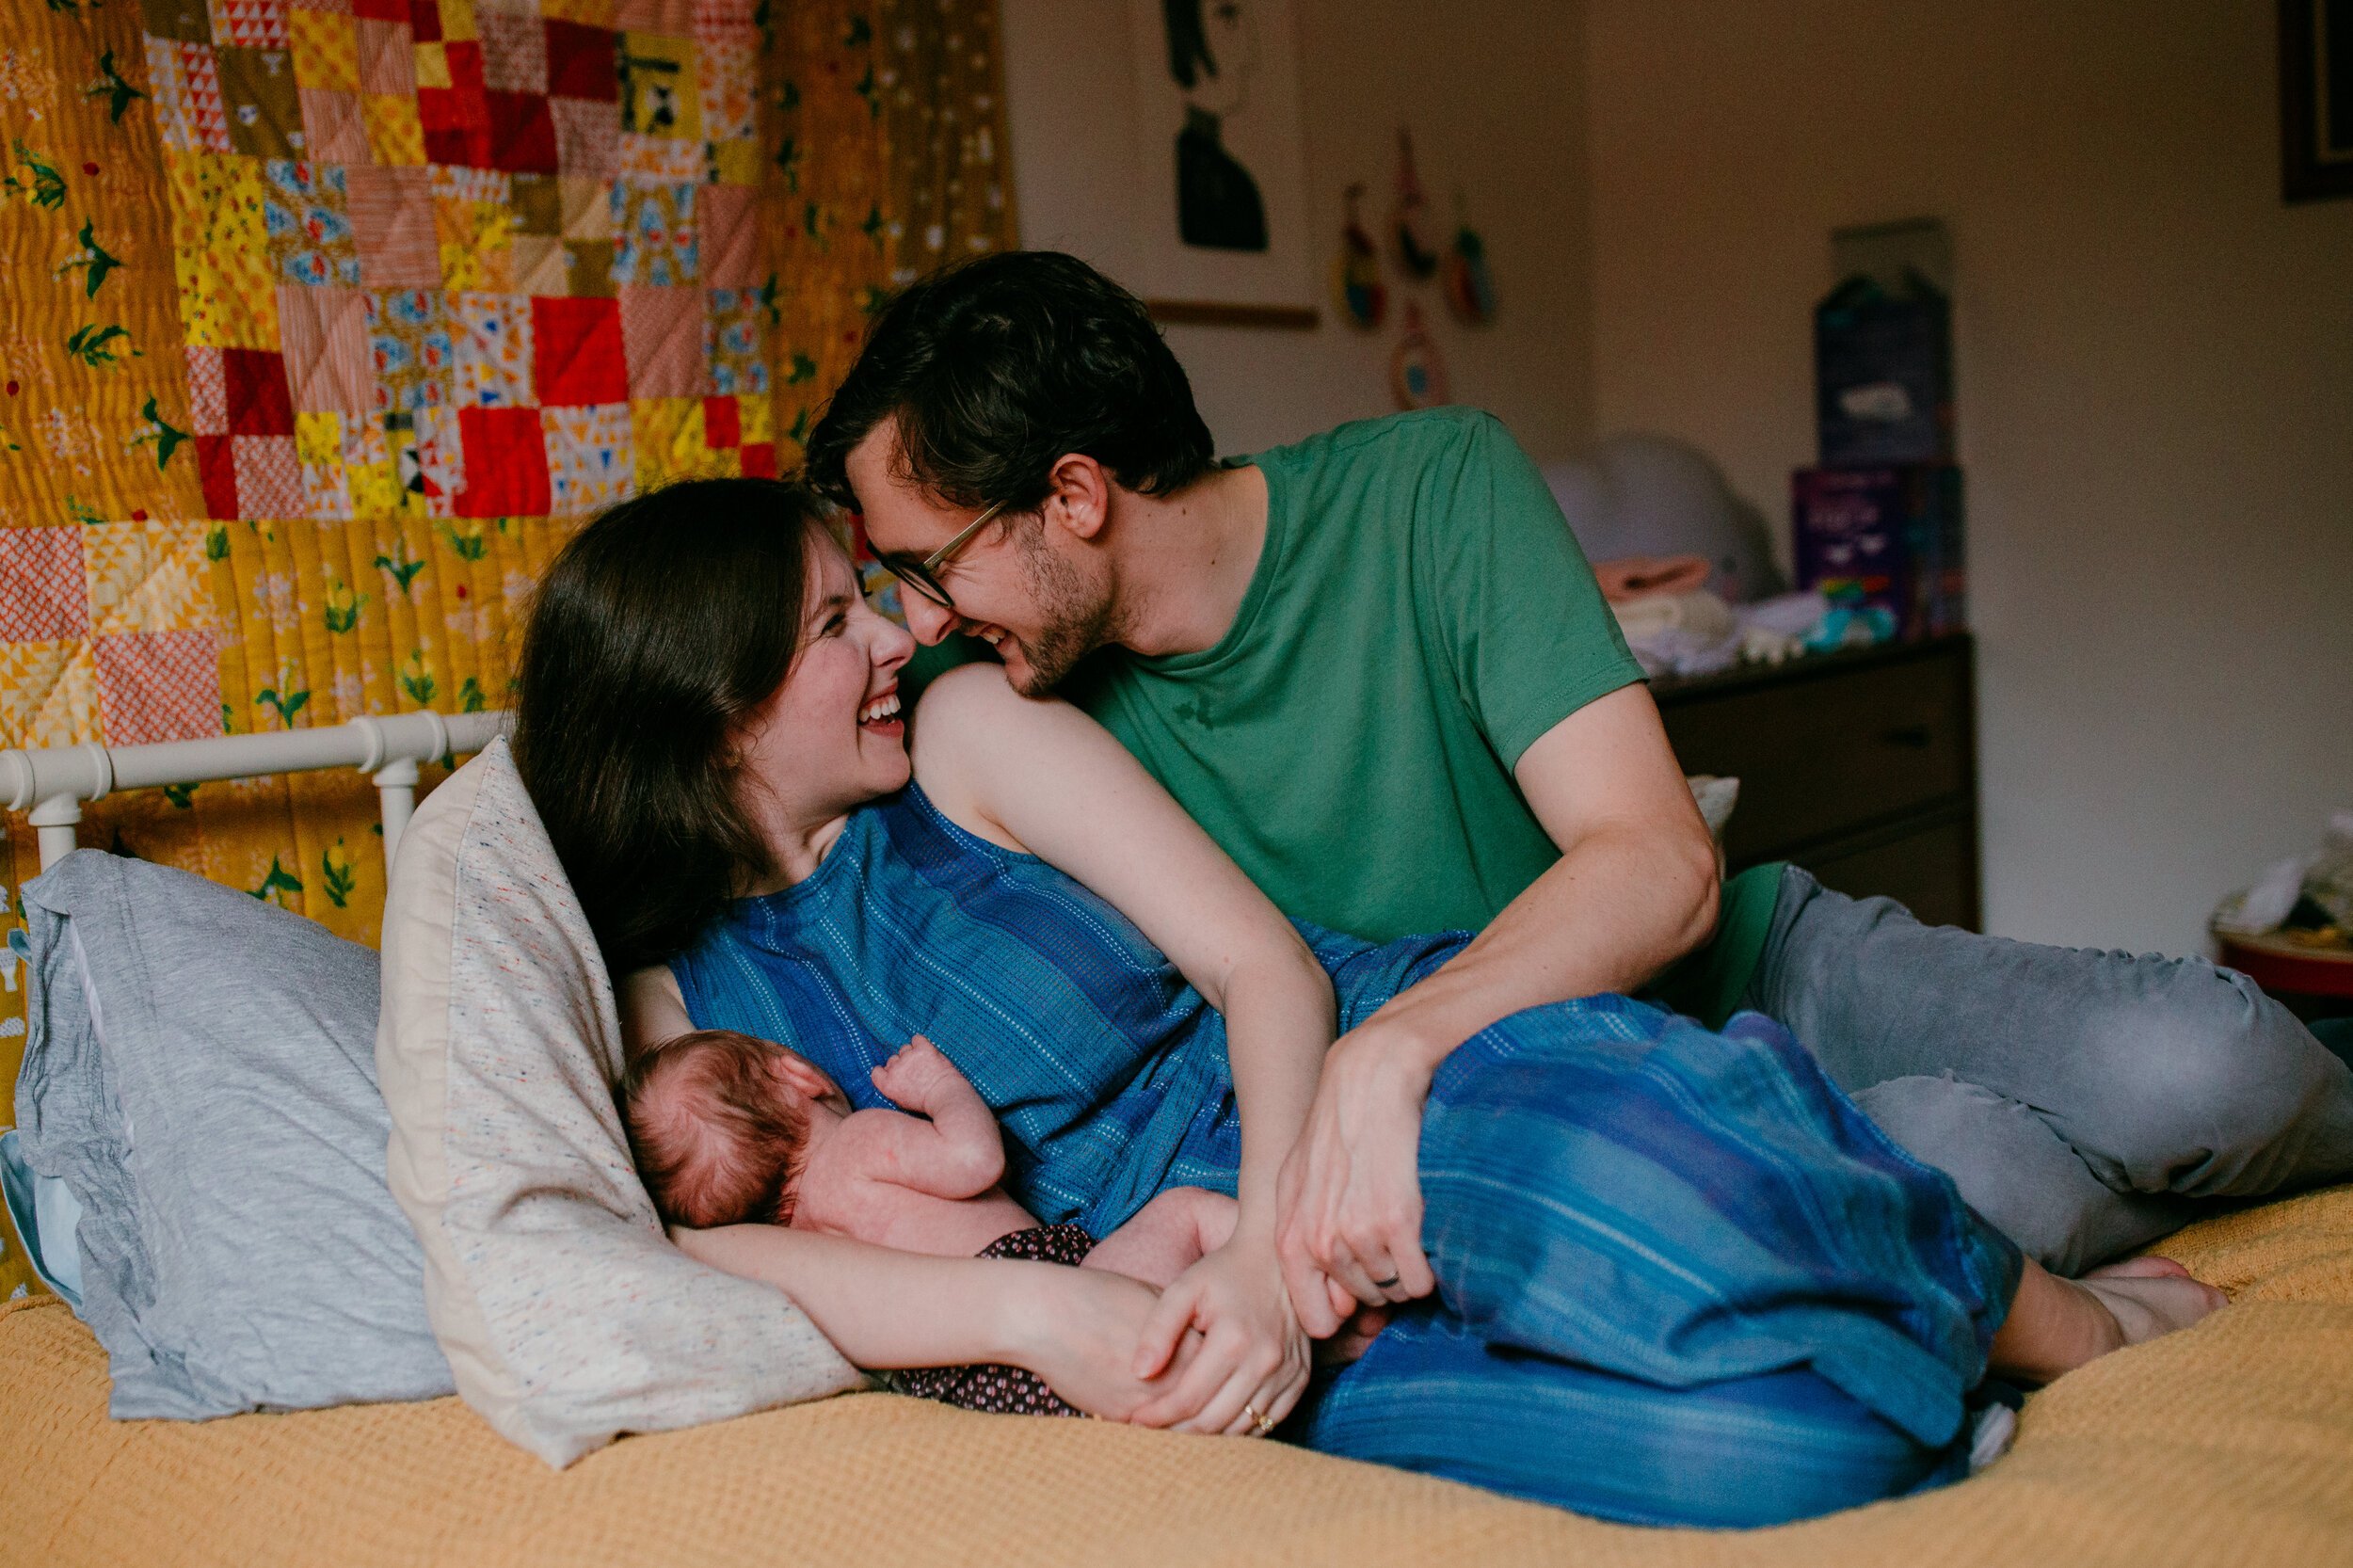 new parents snuggle together on yellow bed holding newborn